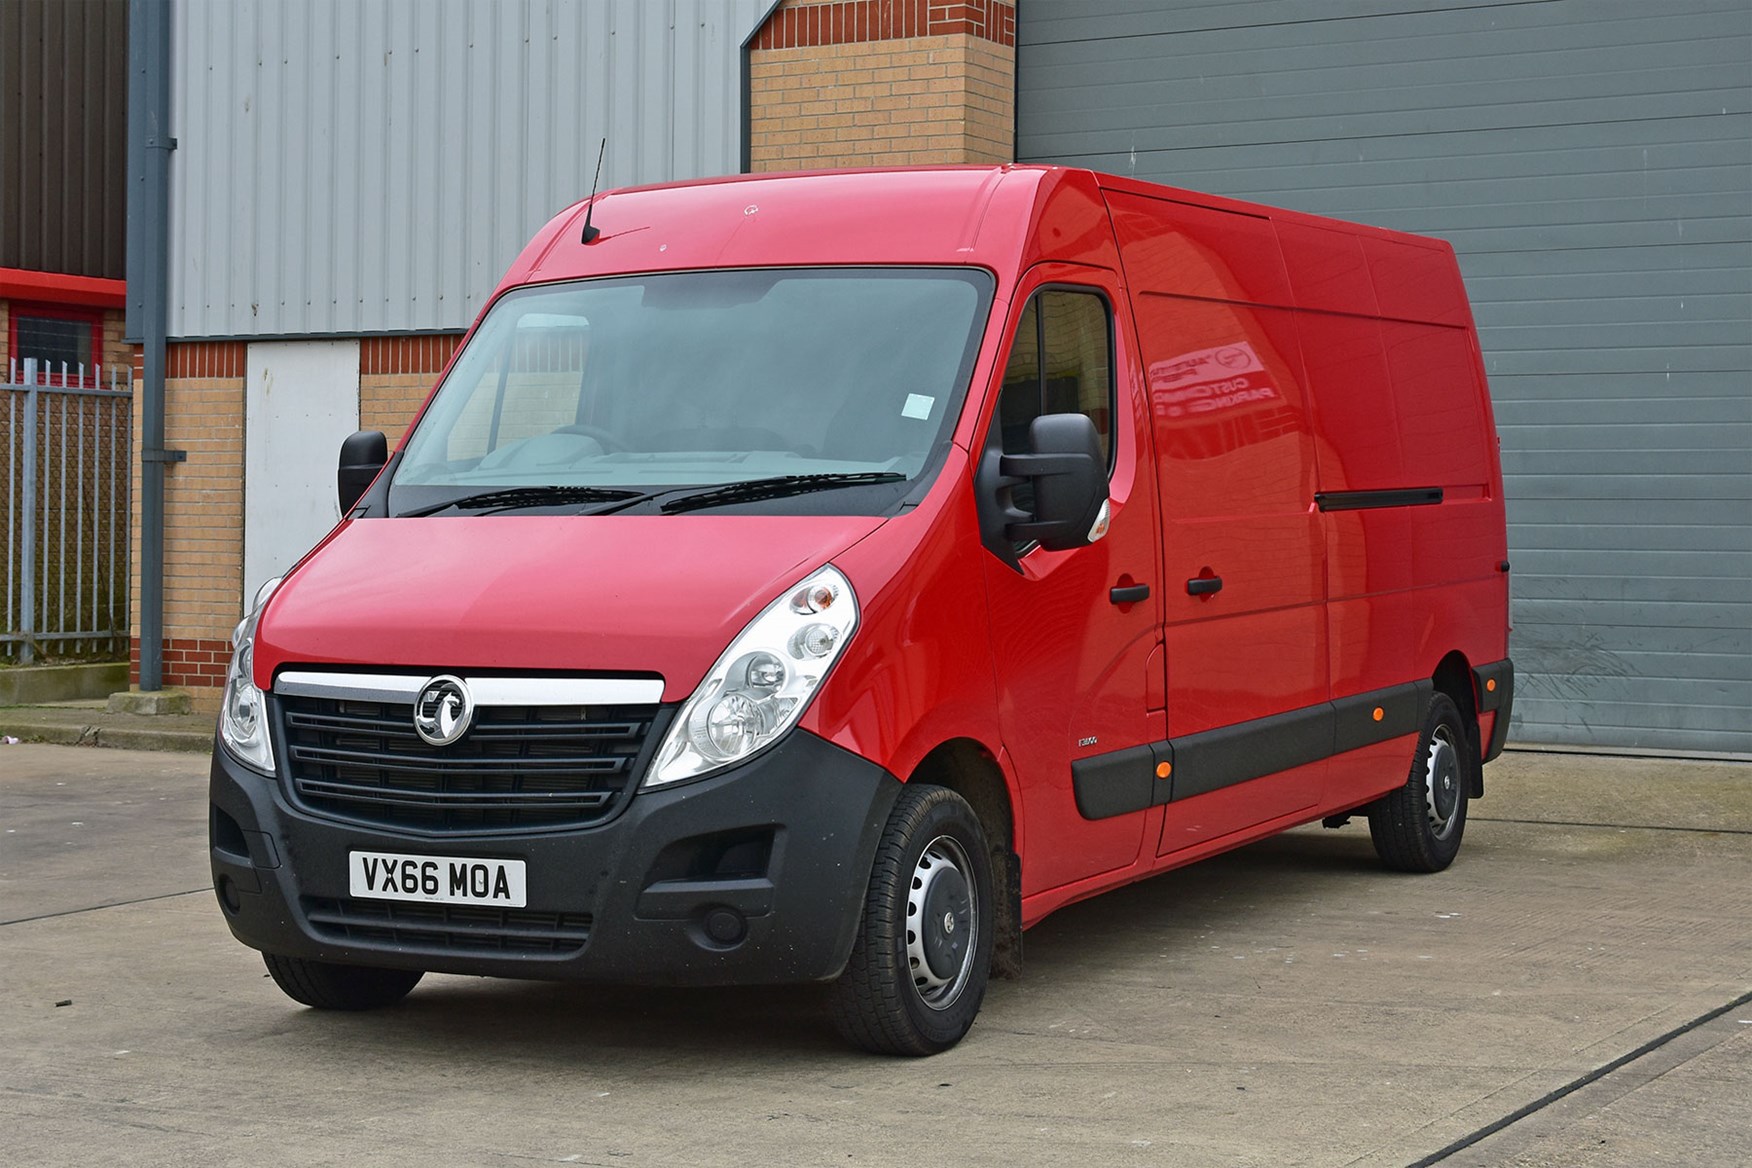 Vauxhall Movano 145hp FWD review - front view, red